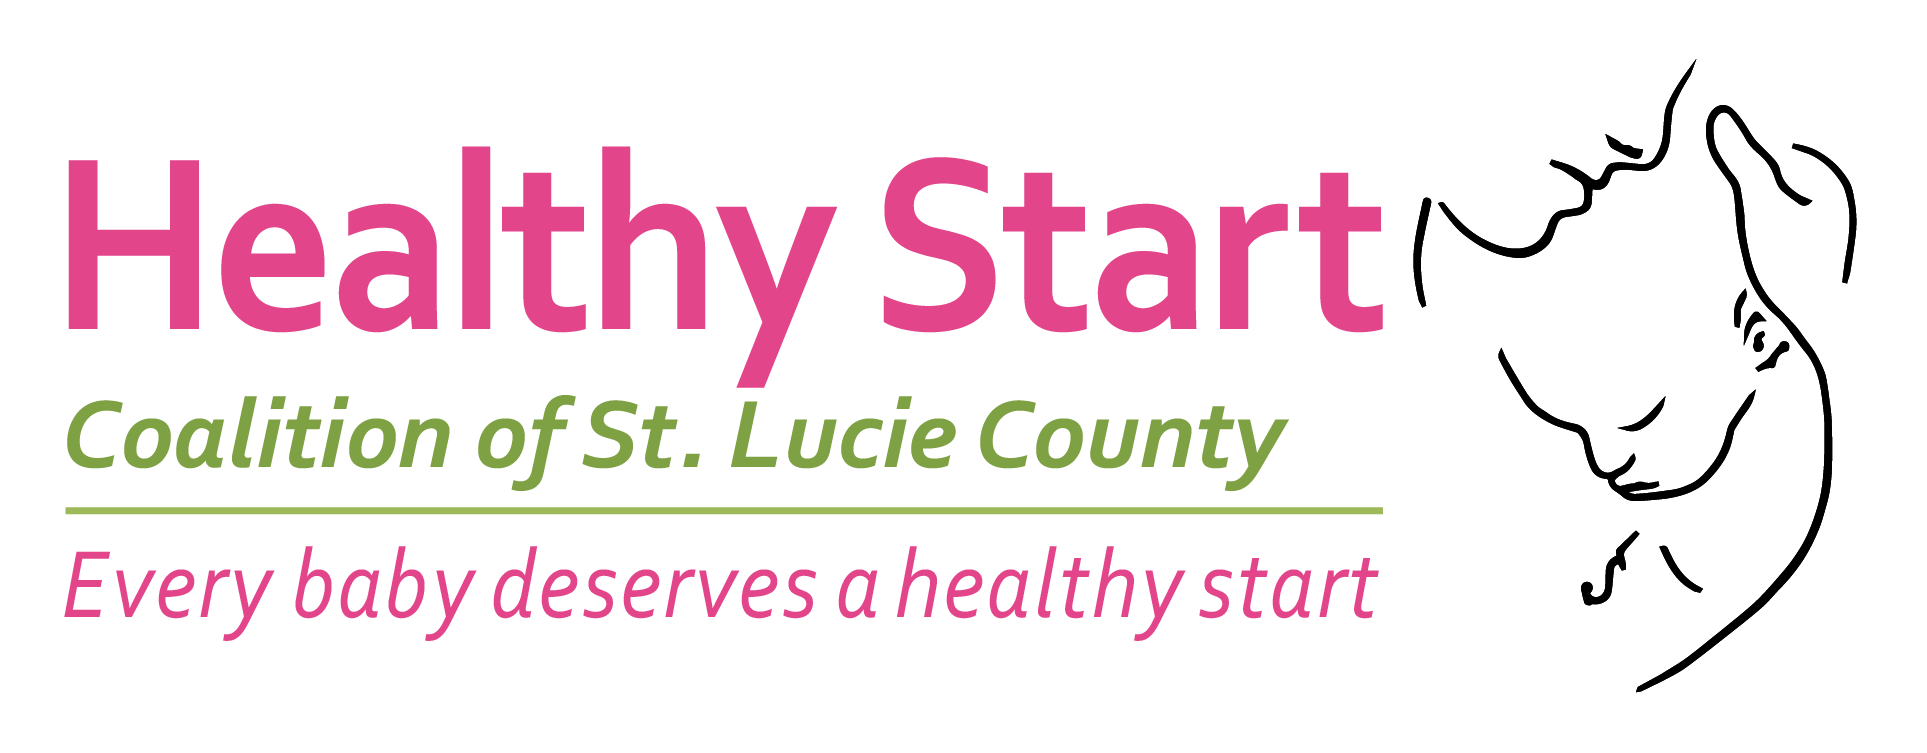 Healthy Start Coalition of St. Lucie County, Inc.